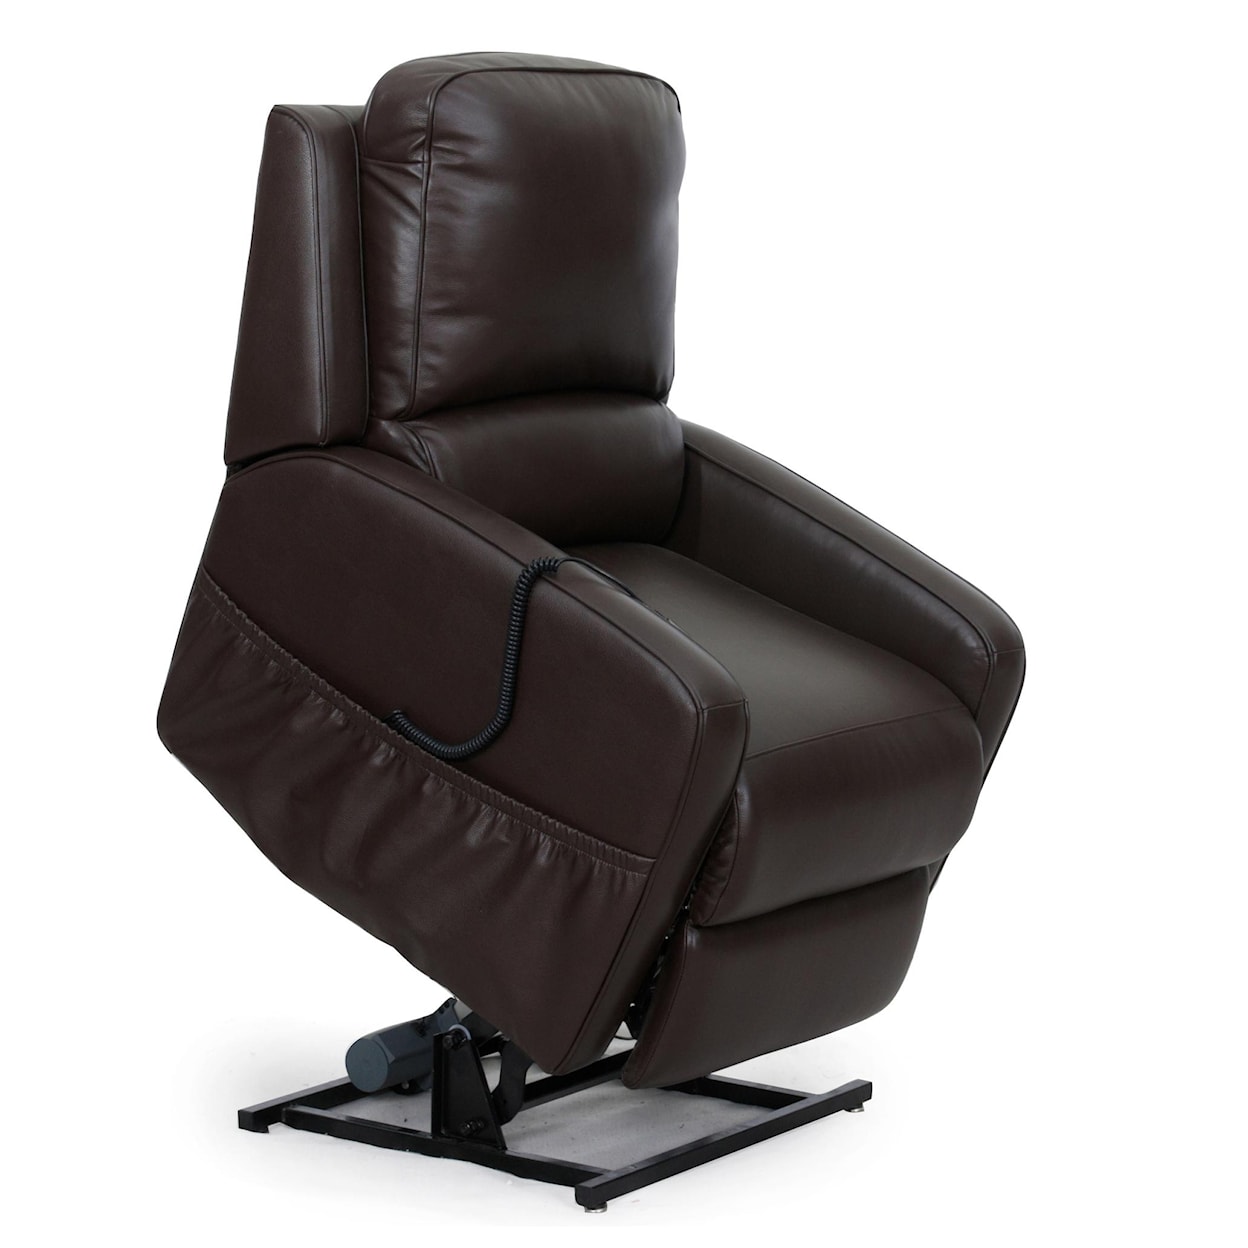 Synergy Home Furnishings 1237 Casual Lift Recliner